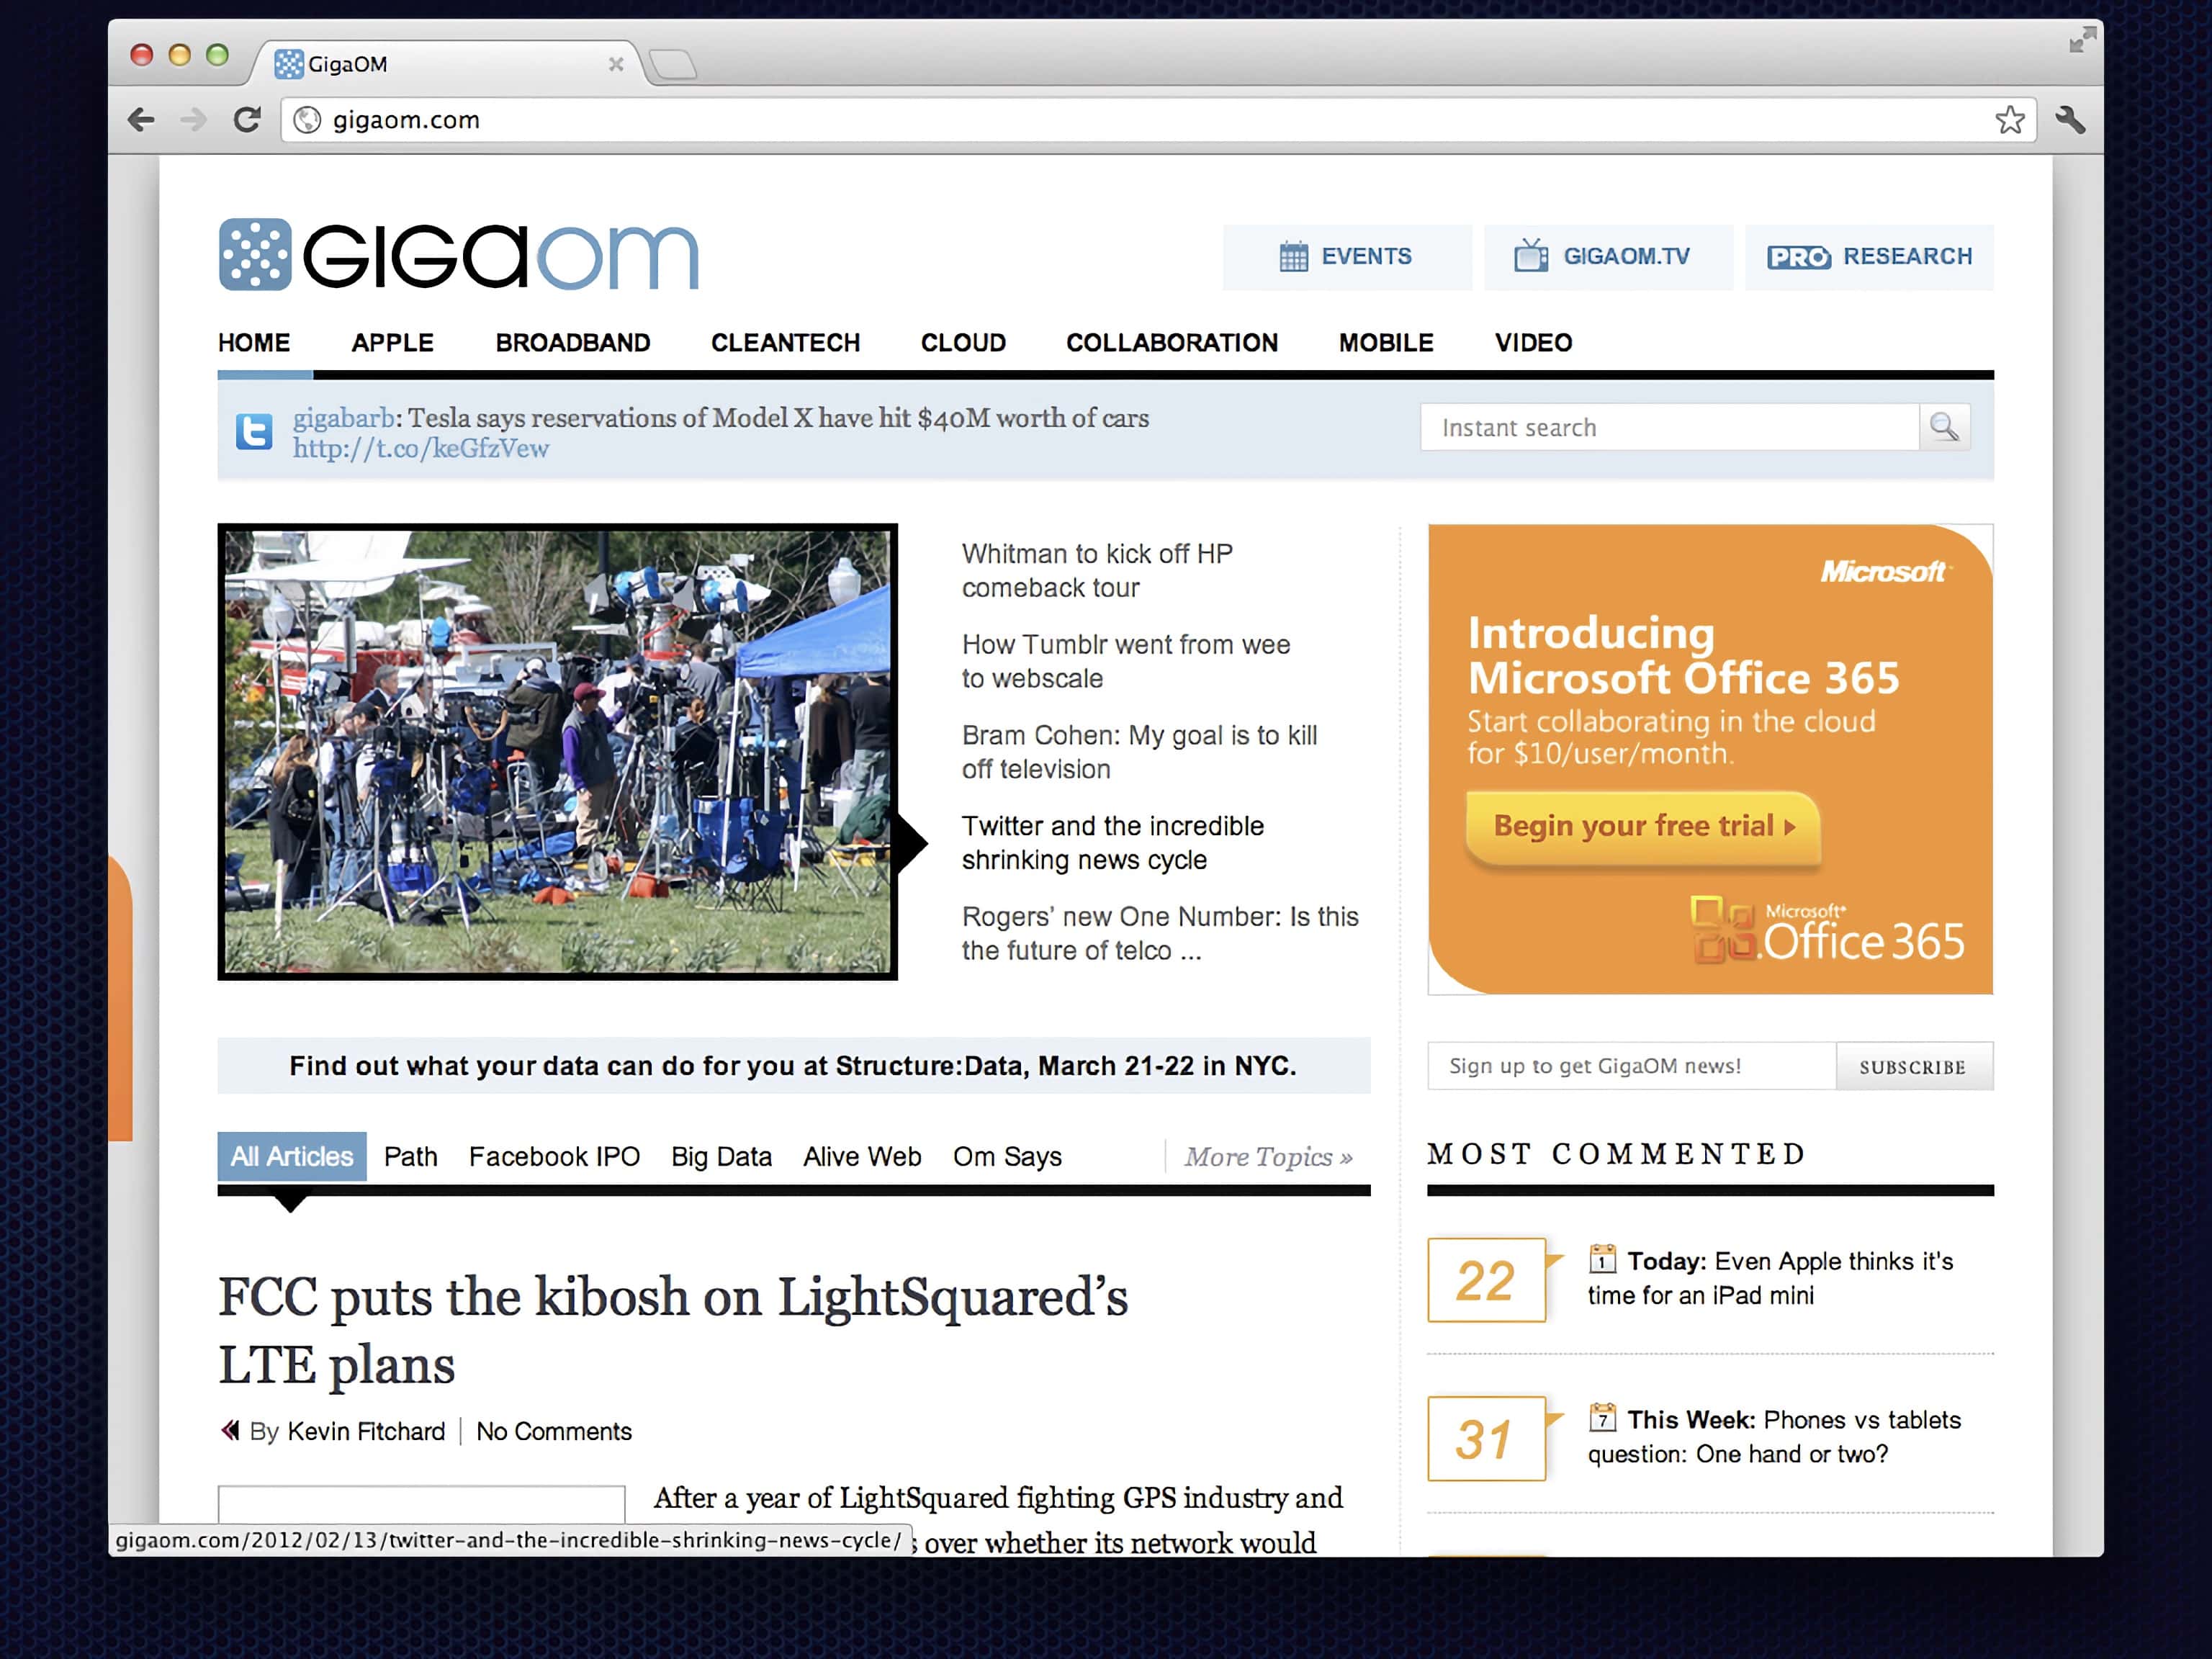 Really briefly, GigaOM is a news and market research company.